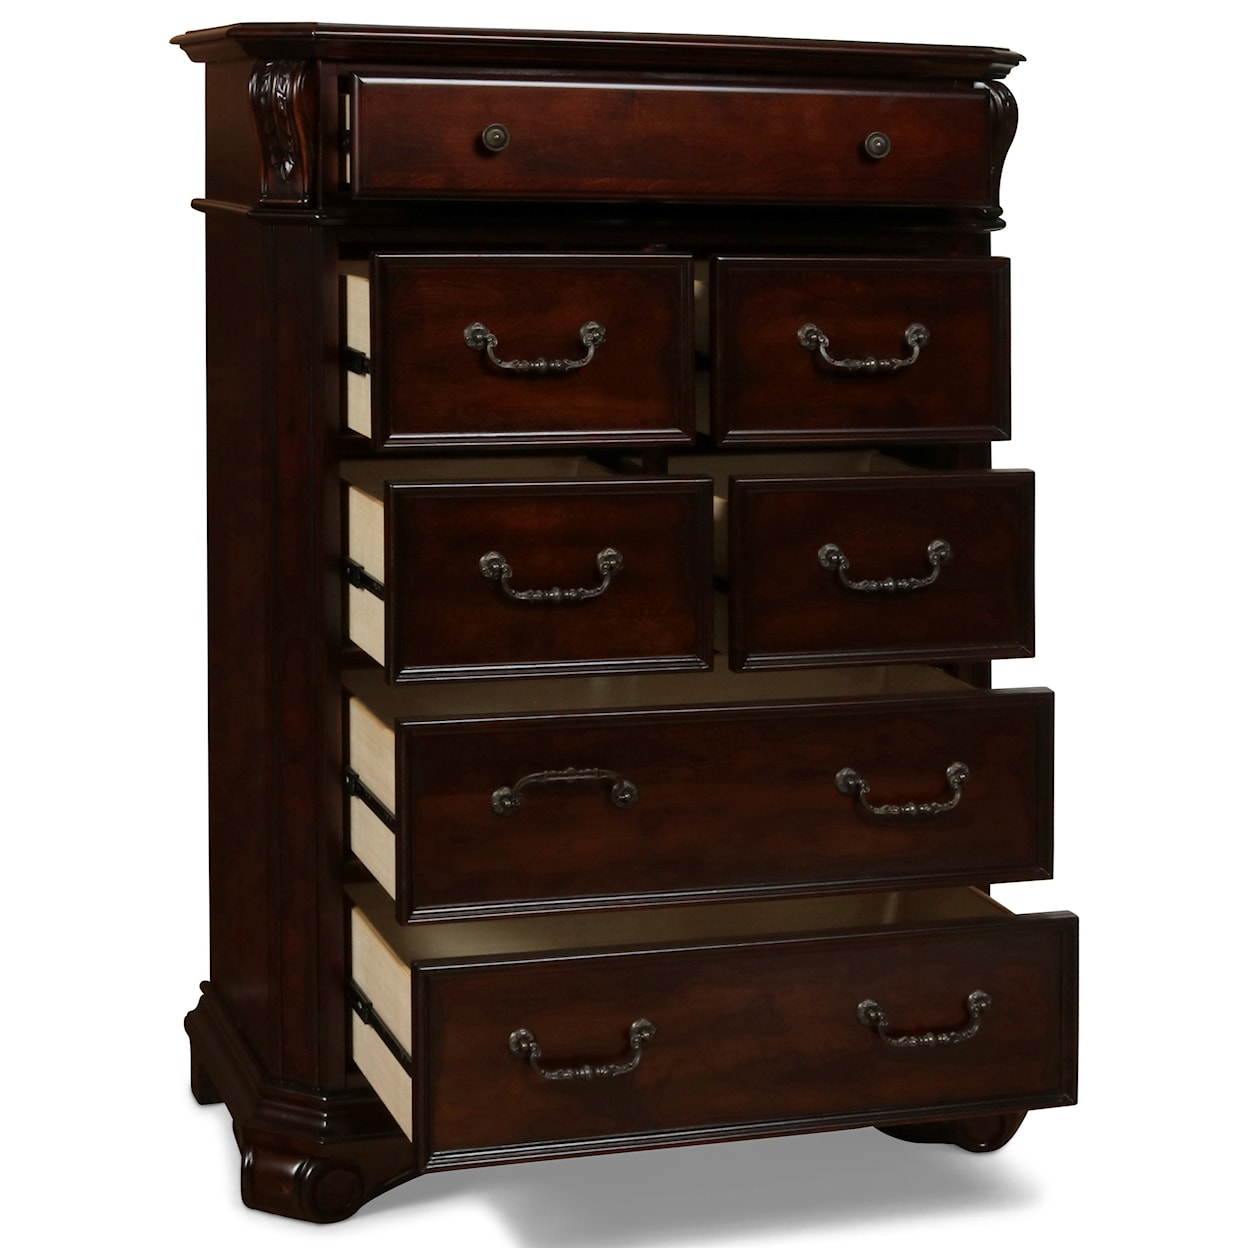 New Classic Furniture Emilie Drawer Chest